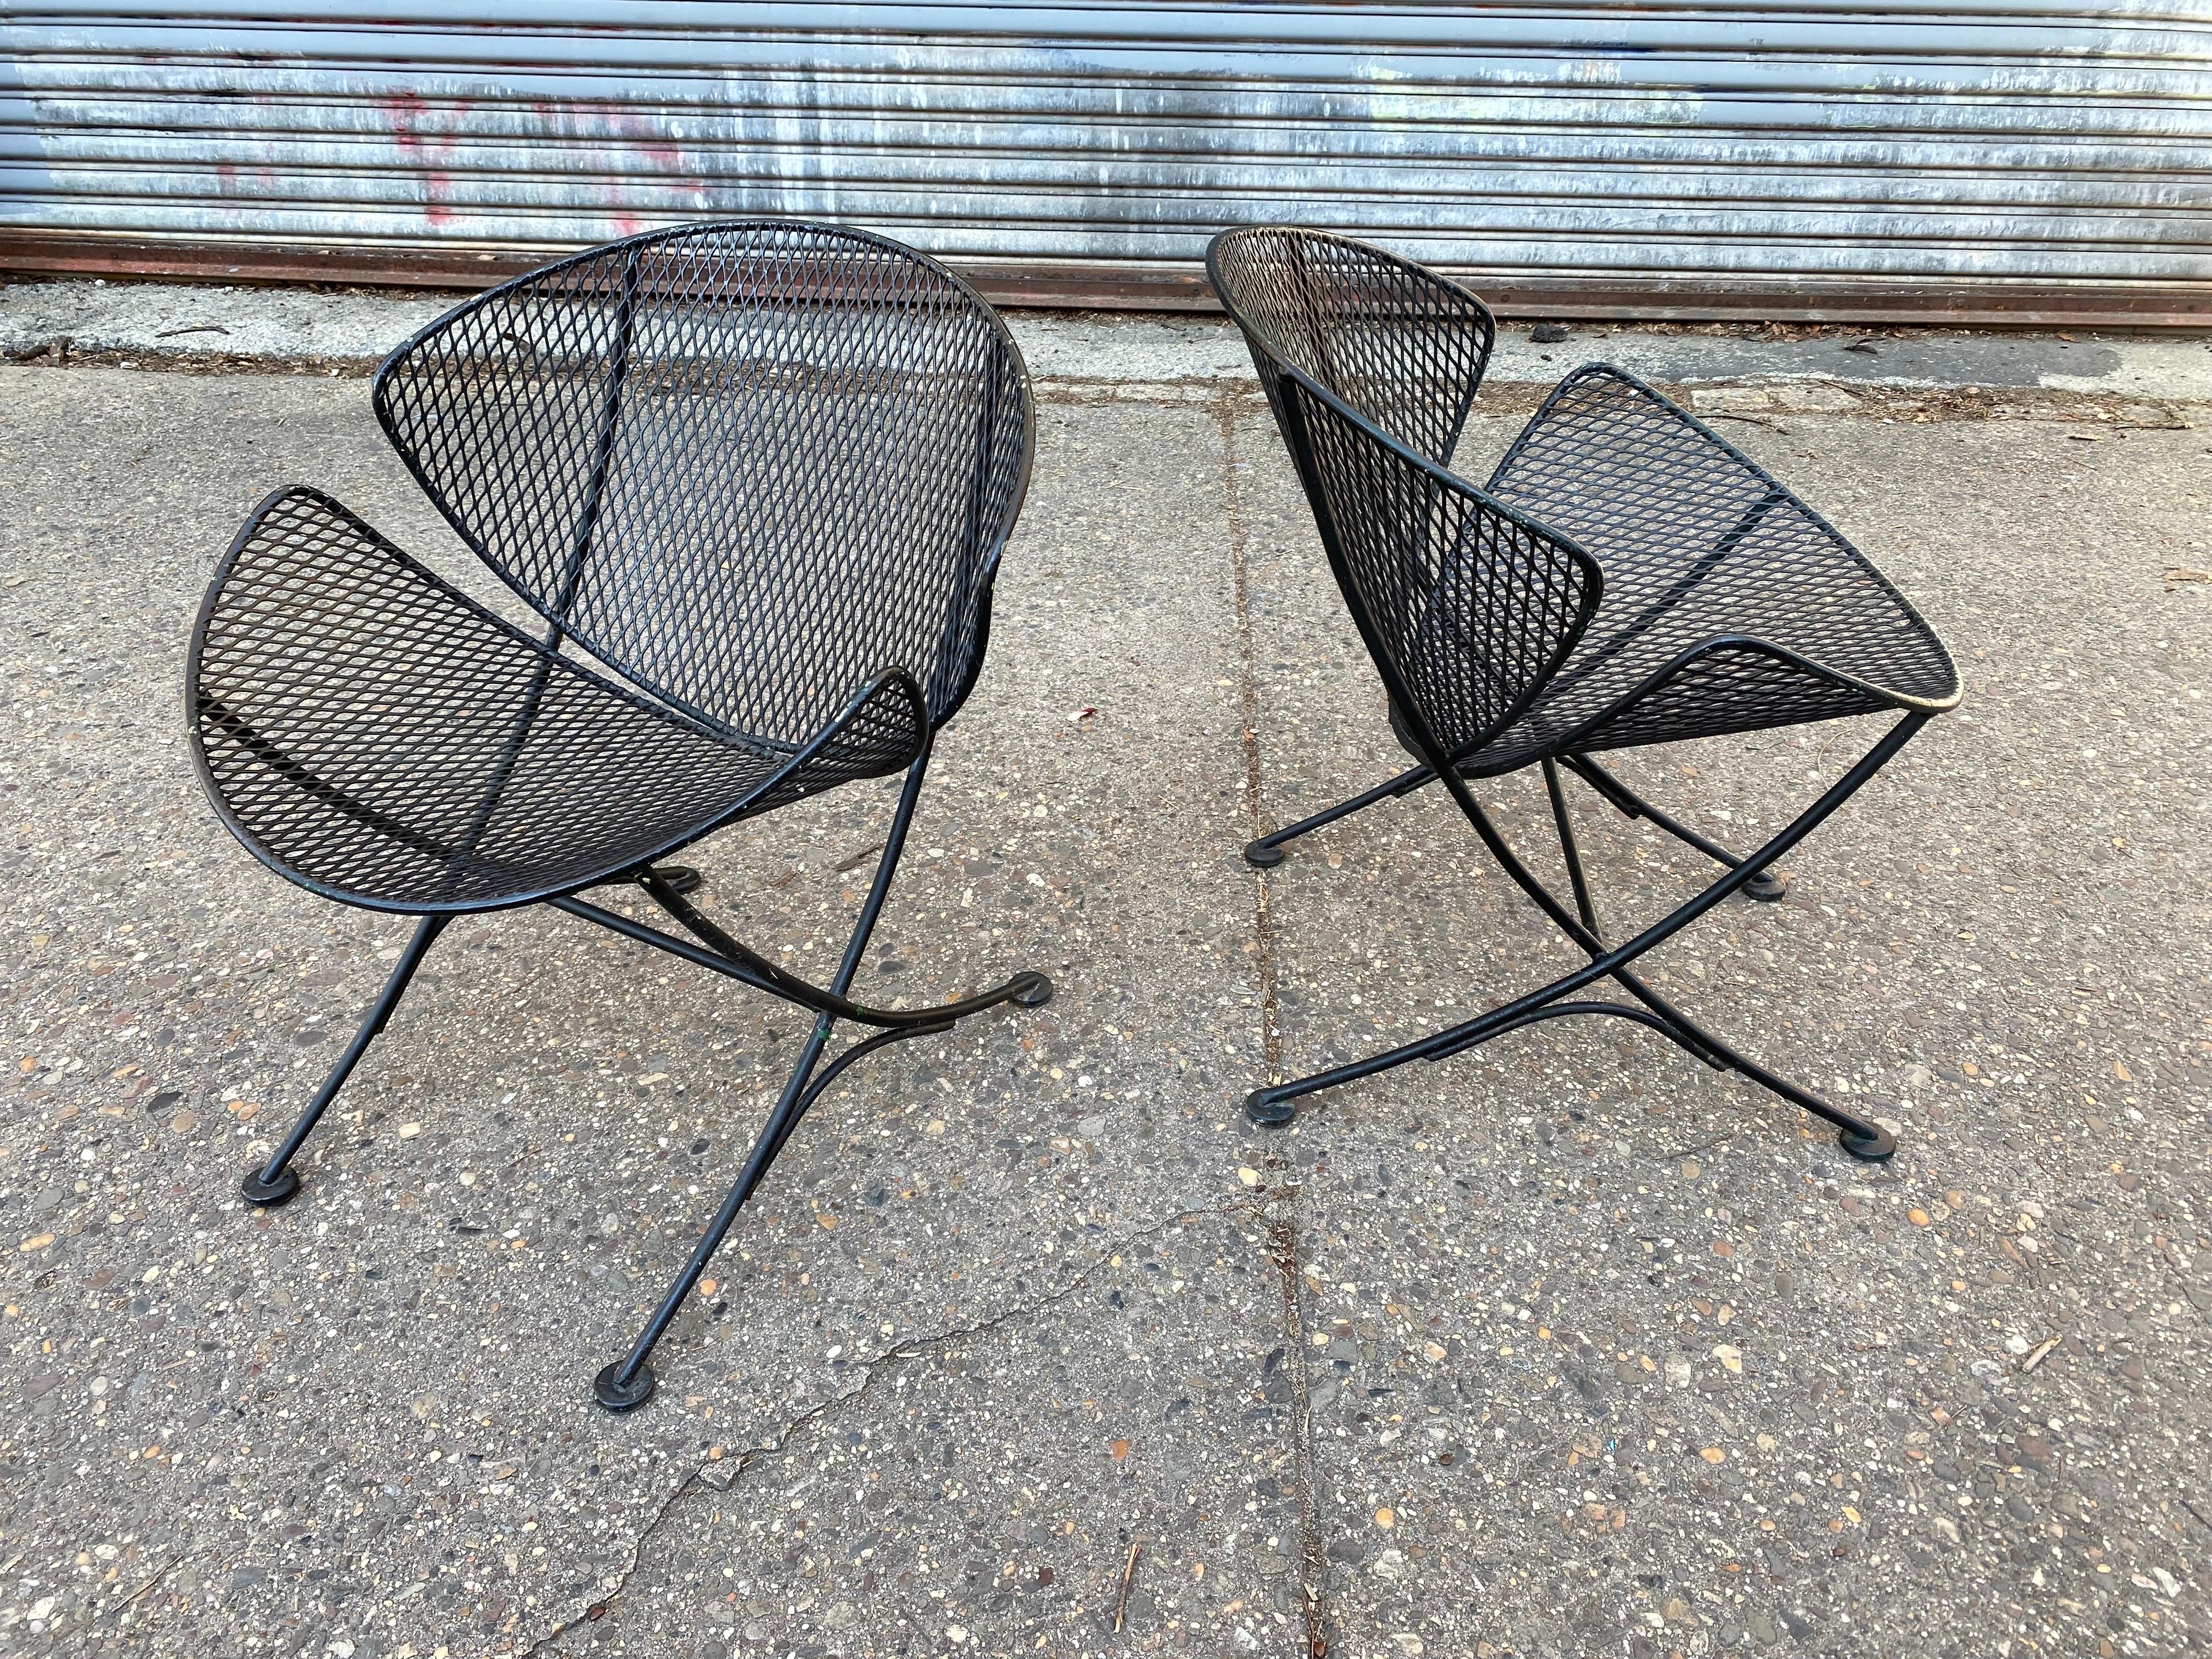 Pair of Tempestini for John Salterini Clam shell chairs. Painted black, in nice shape. Older paint that still presents well. Nice small scale but still very comfortable! Iconic Design from Salterini!